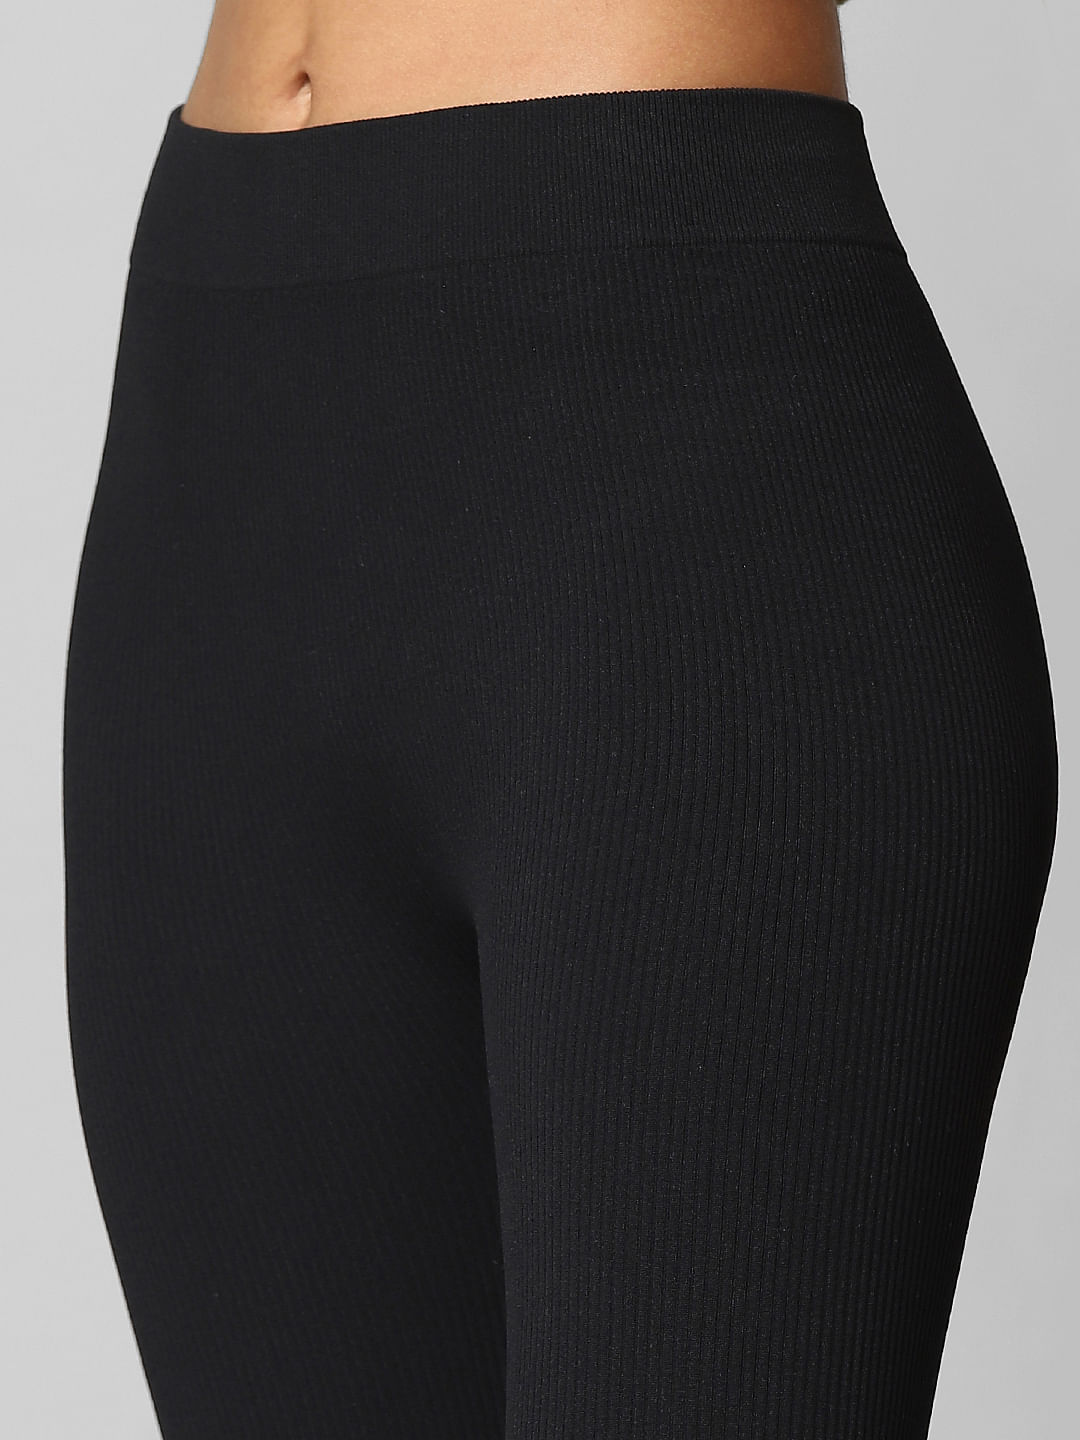 Conceited High Waist Leggings in Shorts, Capri and Full Length - Buttery  Soft - 3